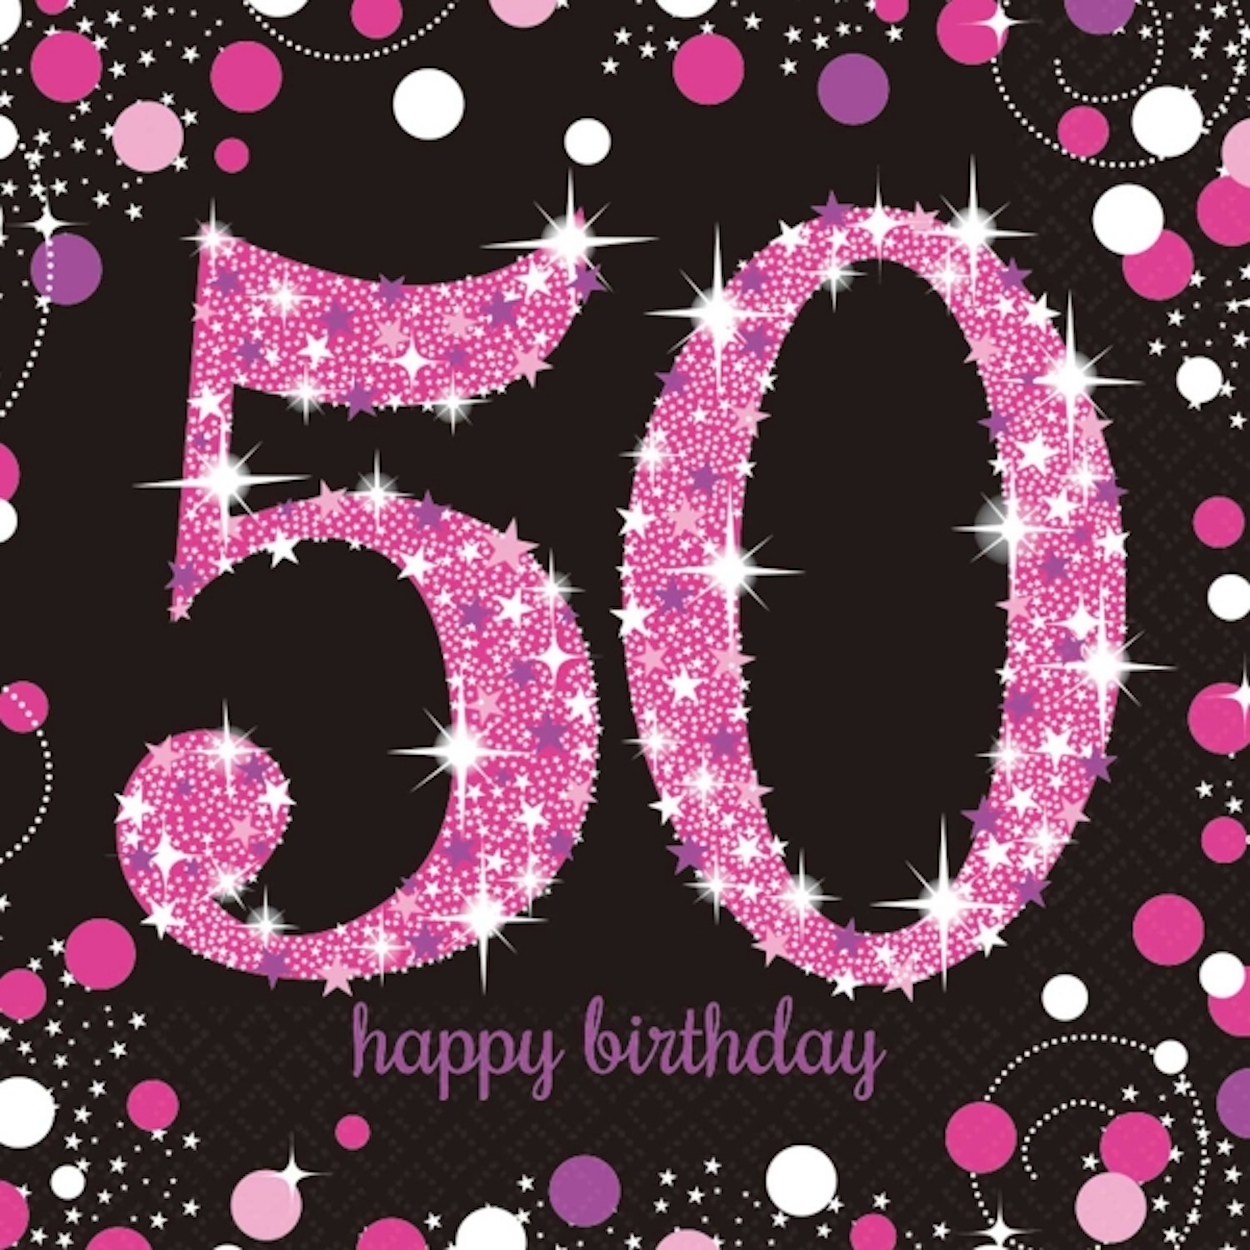 Celebrate the Milestone with Unique 50th Birthday Ideas and Gifts